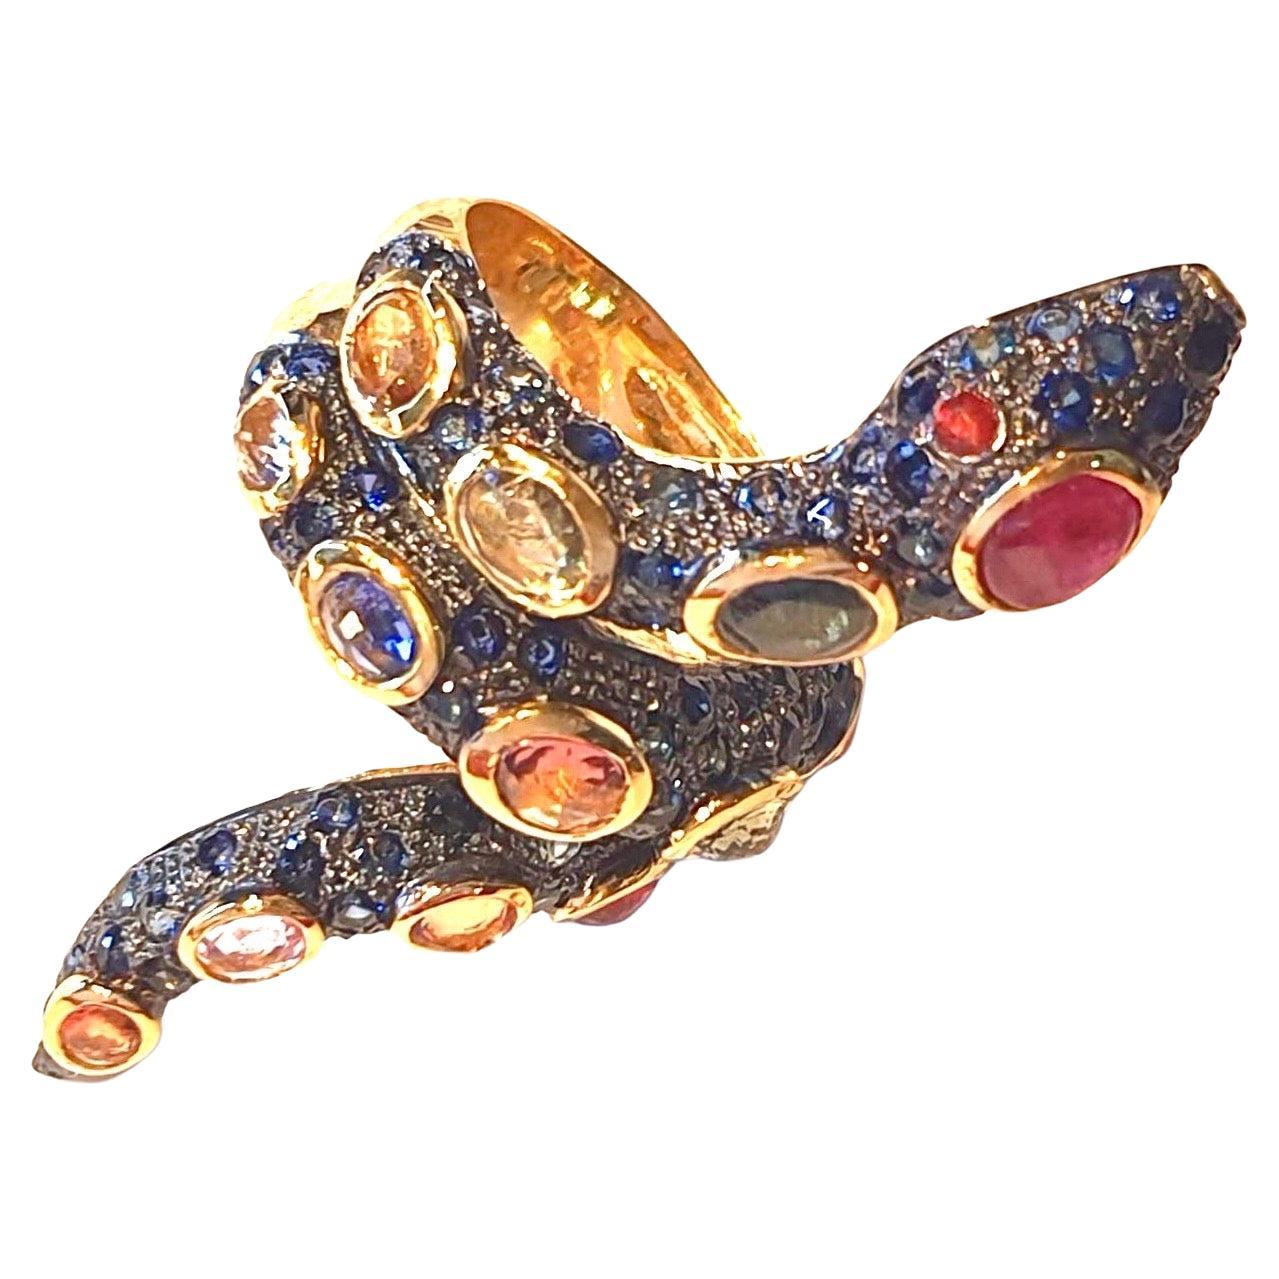 Bochic Serpent Fancy Sapphire & Ruby Ring 
Ruby Cabochon (Real)
Pink Natural Sapphire 
Green Natural Sapphire
Rose Natural Sapphire 
Light Blue Natural Sapphire
Red Natural Sapphire
Black Silver and 22 K Gold plating 
3 microns 
Comes with a Bochic